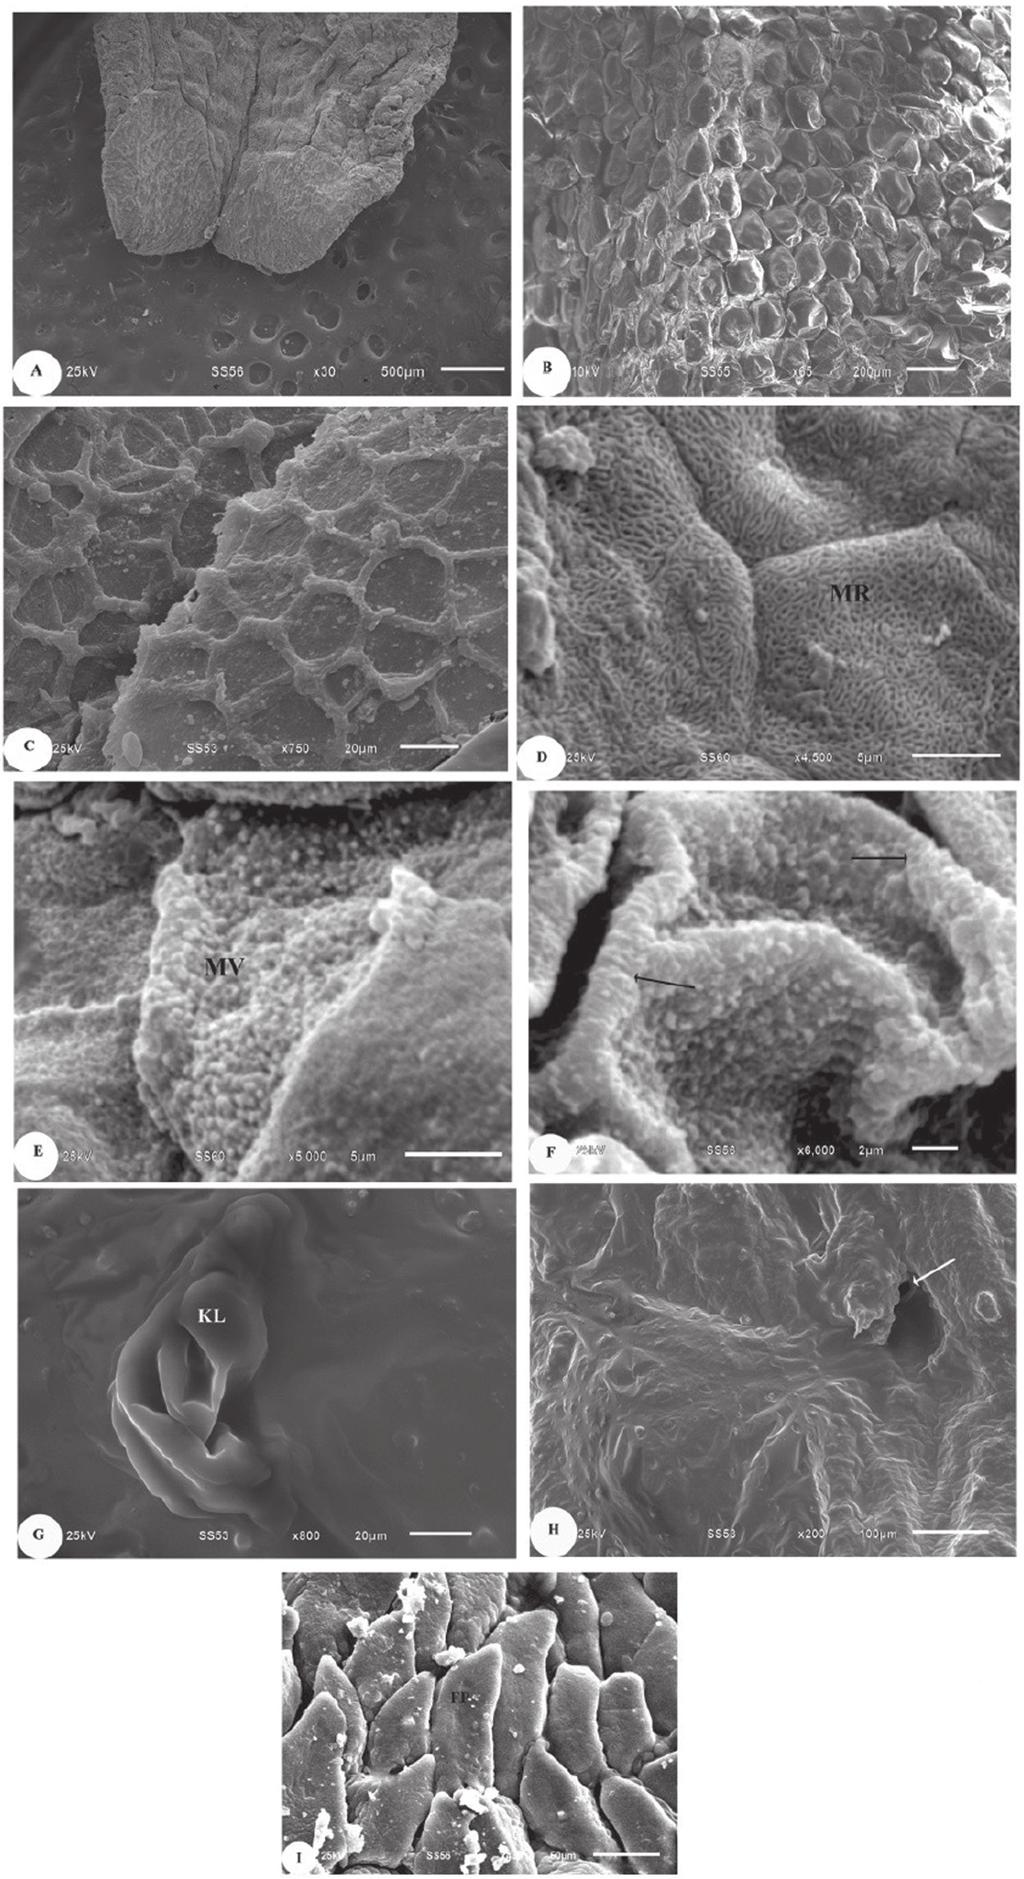 Folia Morphol., 2016, Vol. 75, No. 2 Figure 6. Scanning electron micrograph of the dorsal surface of the T. annularis showing: A. Flat tongue with bifurcated apex. Scale bar: 500 µm; B.